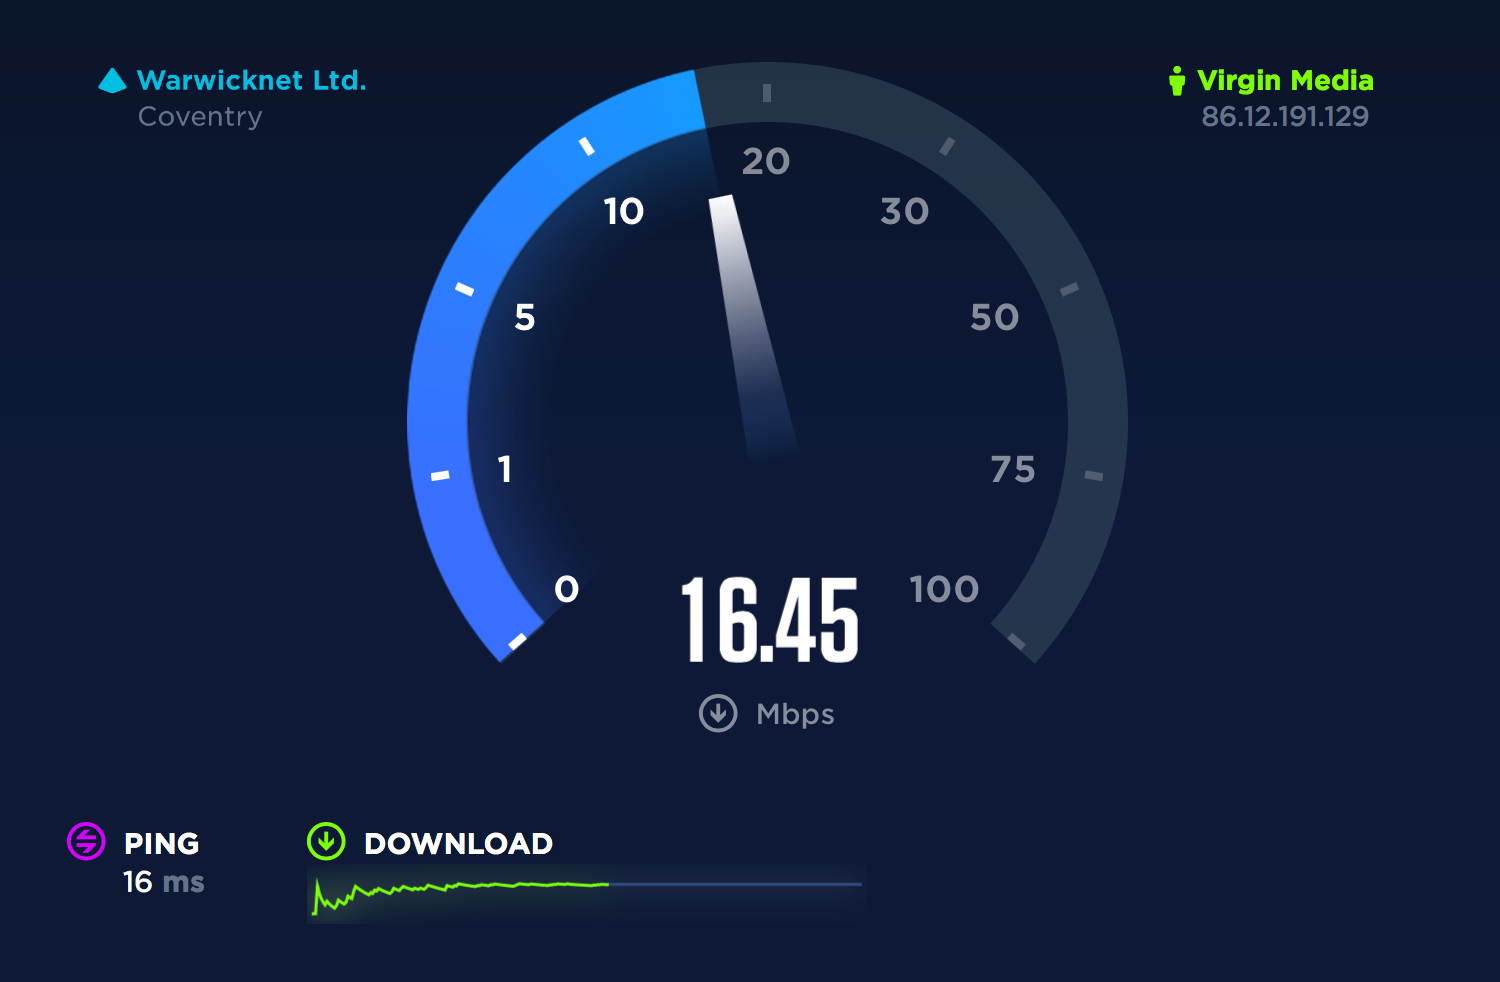 speedtest by ookla controversy